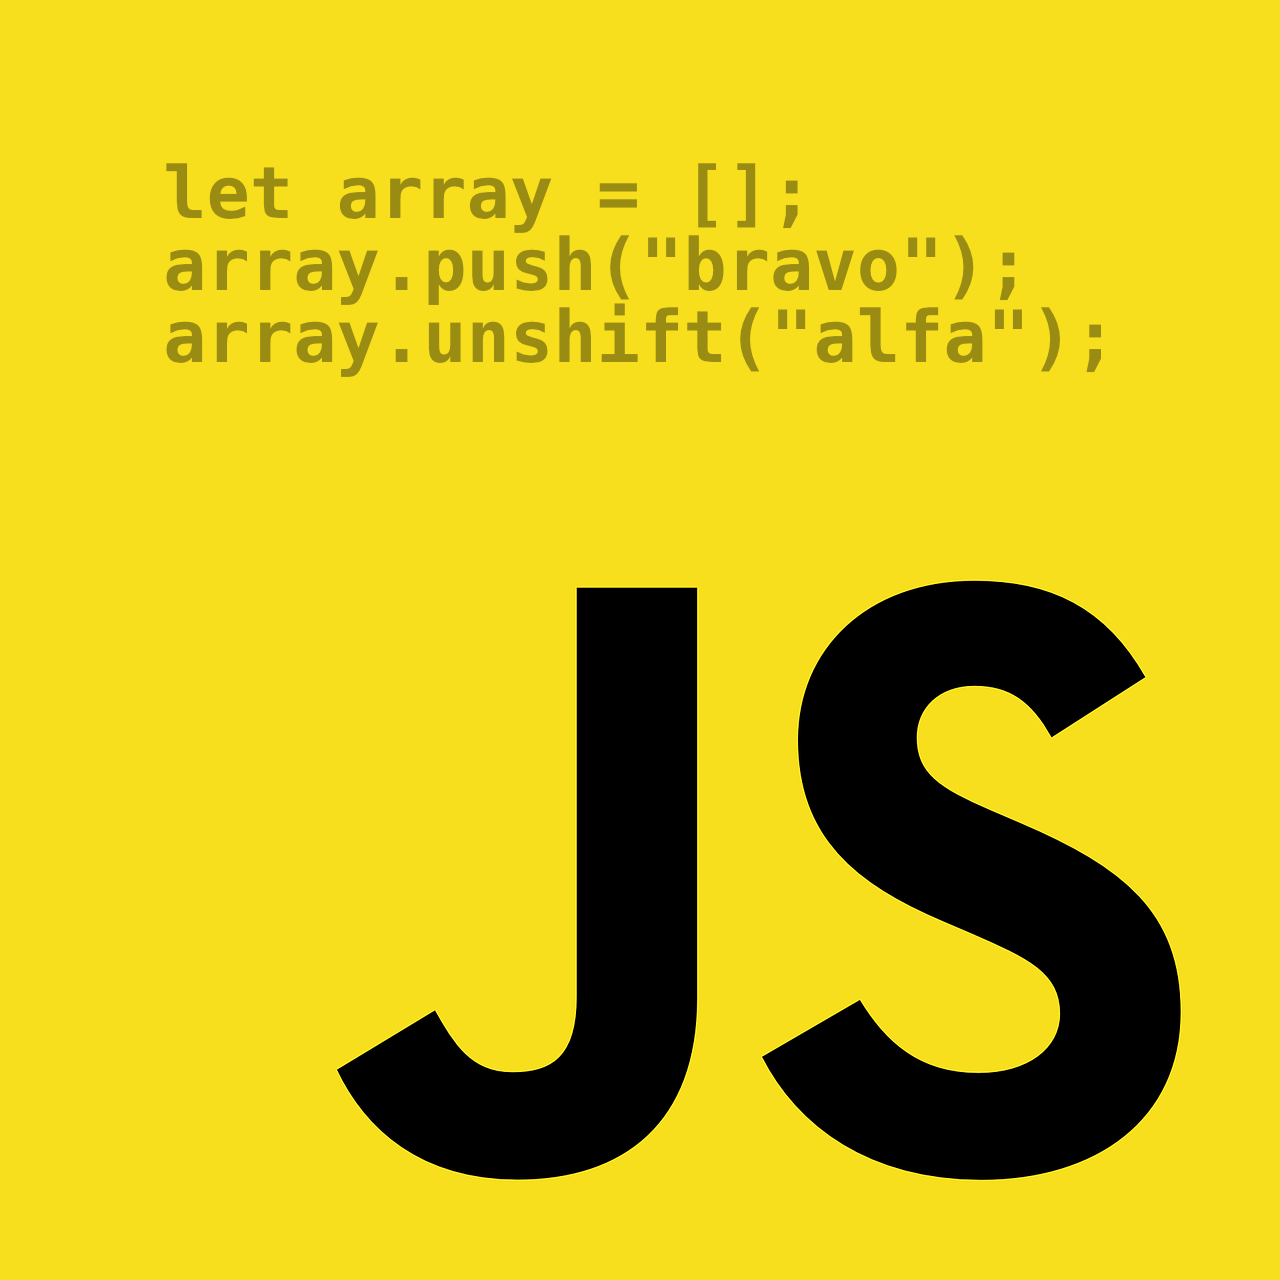 Working with JavaScript arrays